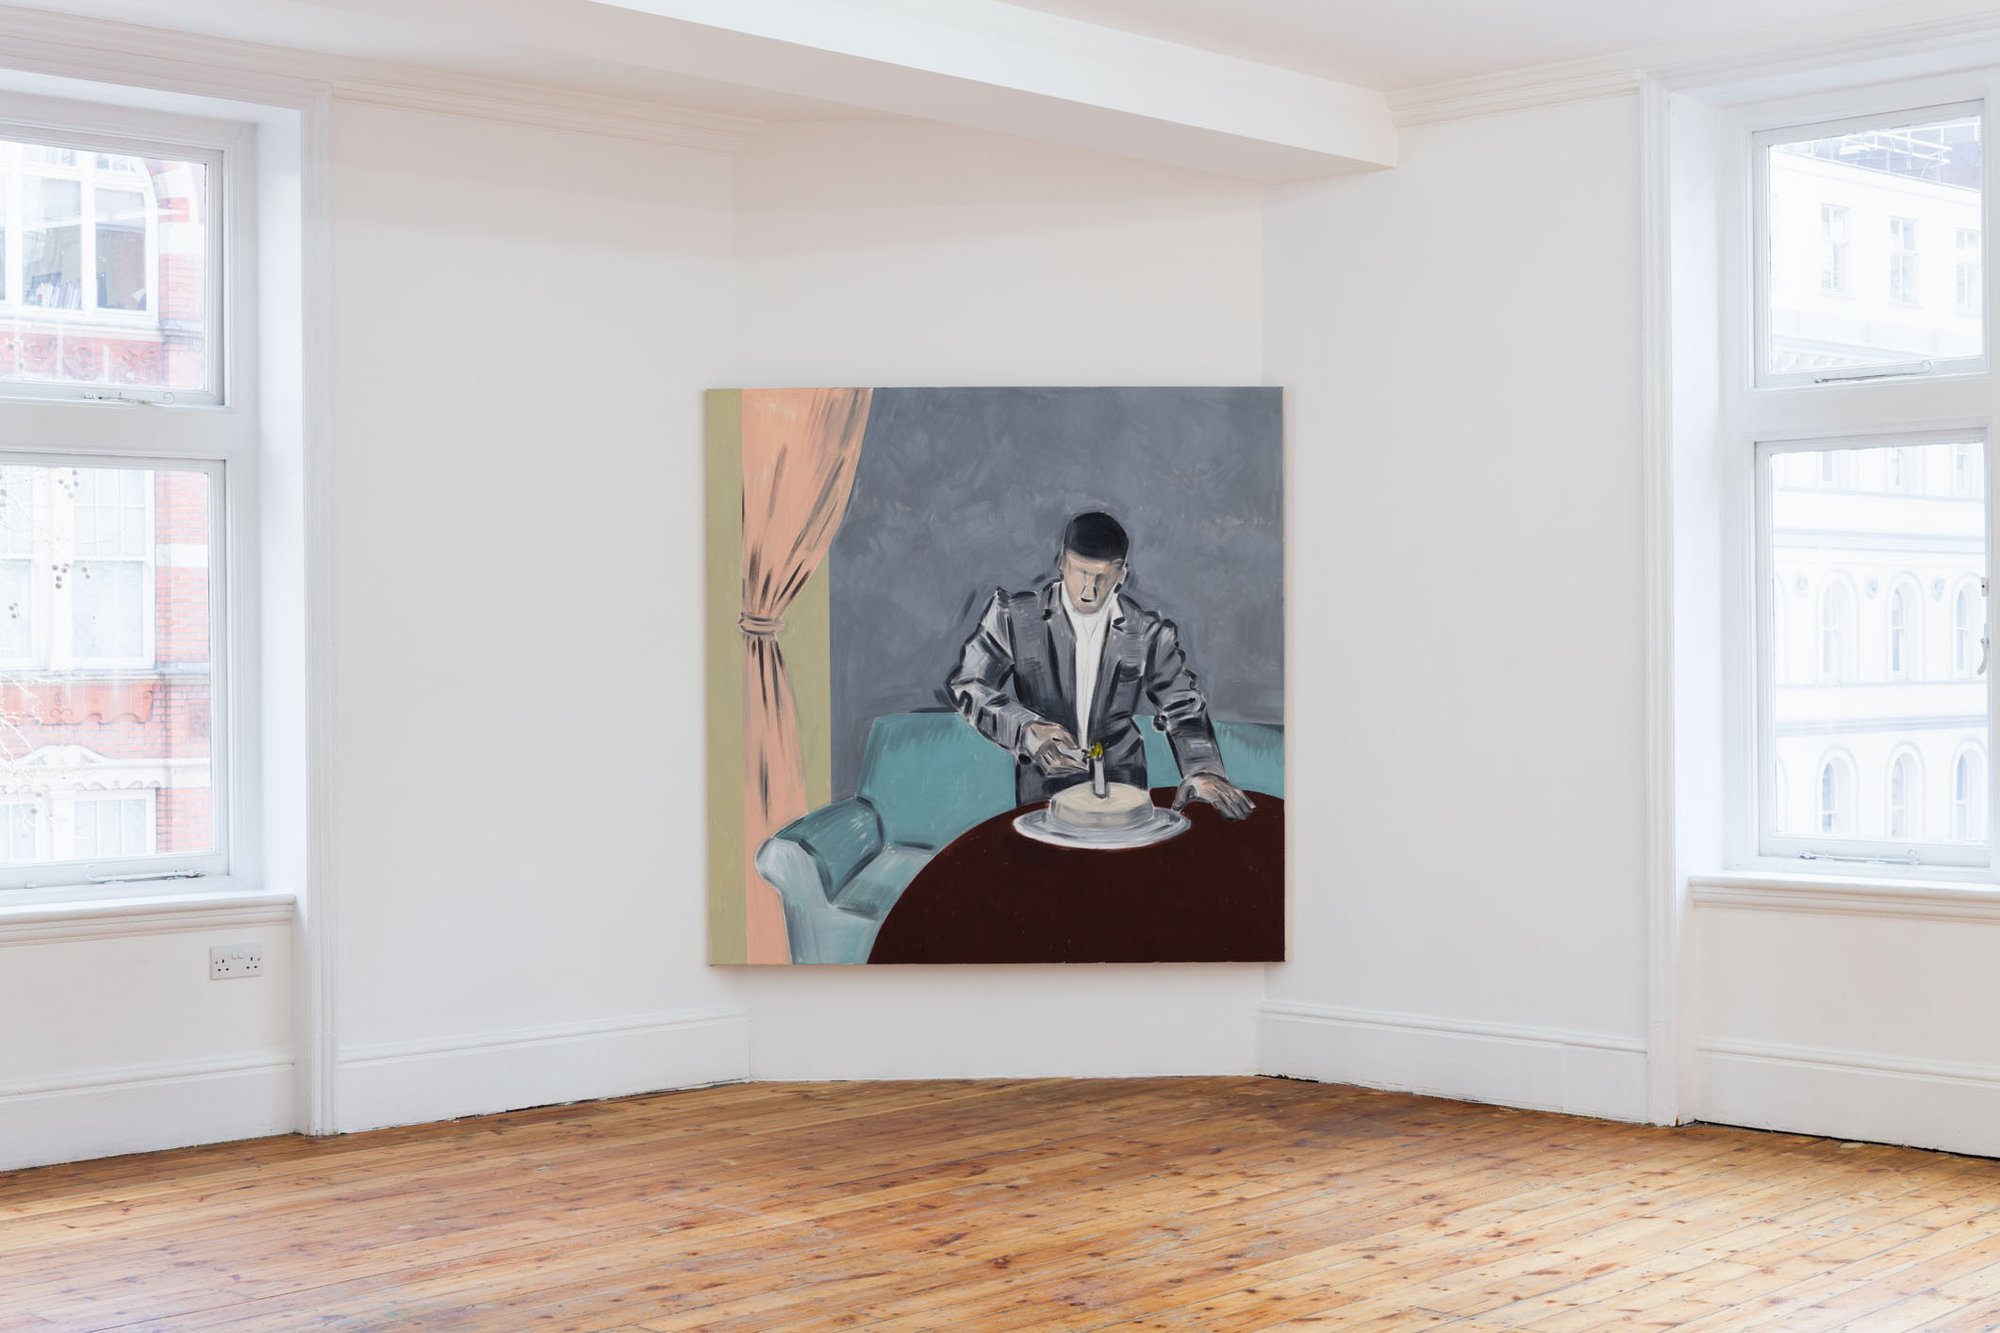 Apostolos Georgiou, Untitled, acrylic on canvas, 170 x 170 cm, 2016. Installation view, The Same Old Fucking Story, Rodeo, London, 2016